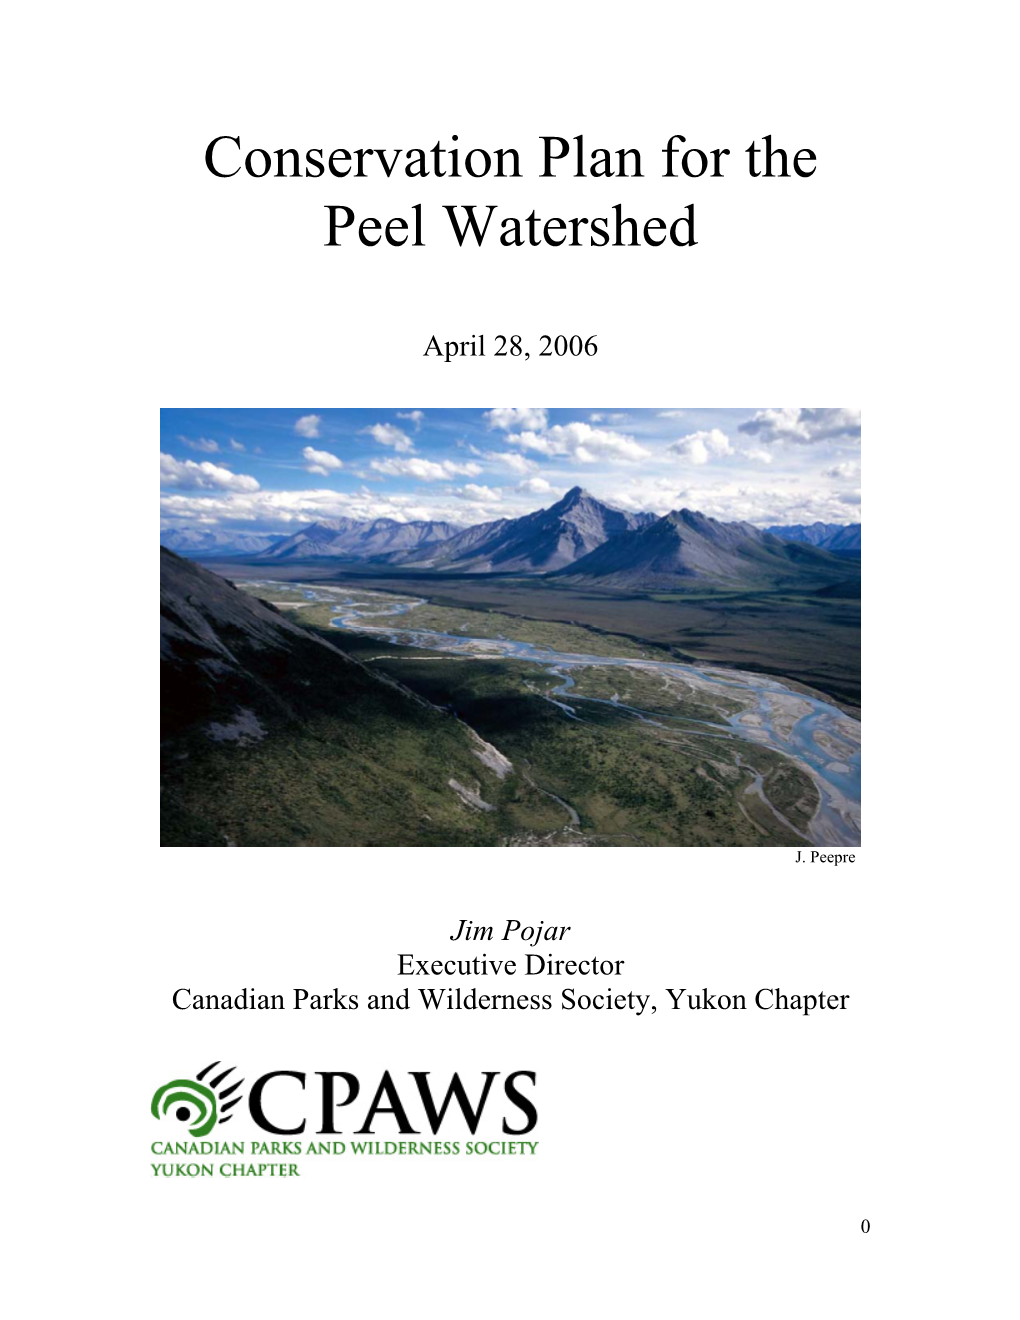 Conservation Plan for Peel Watershed